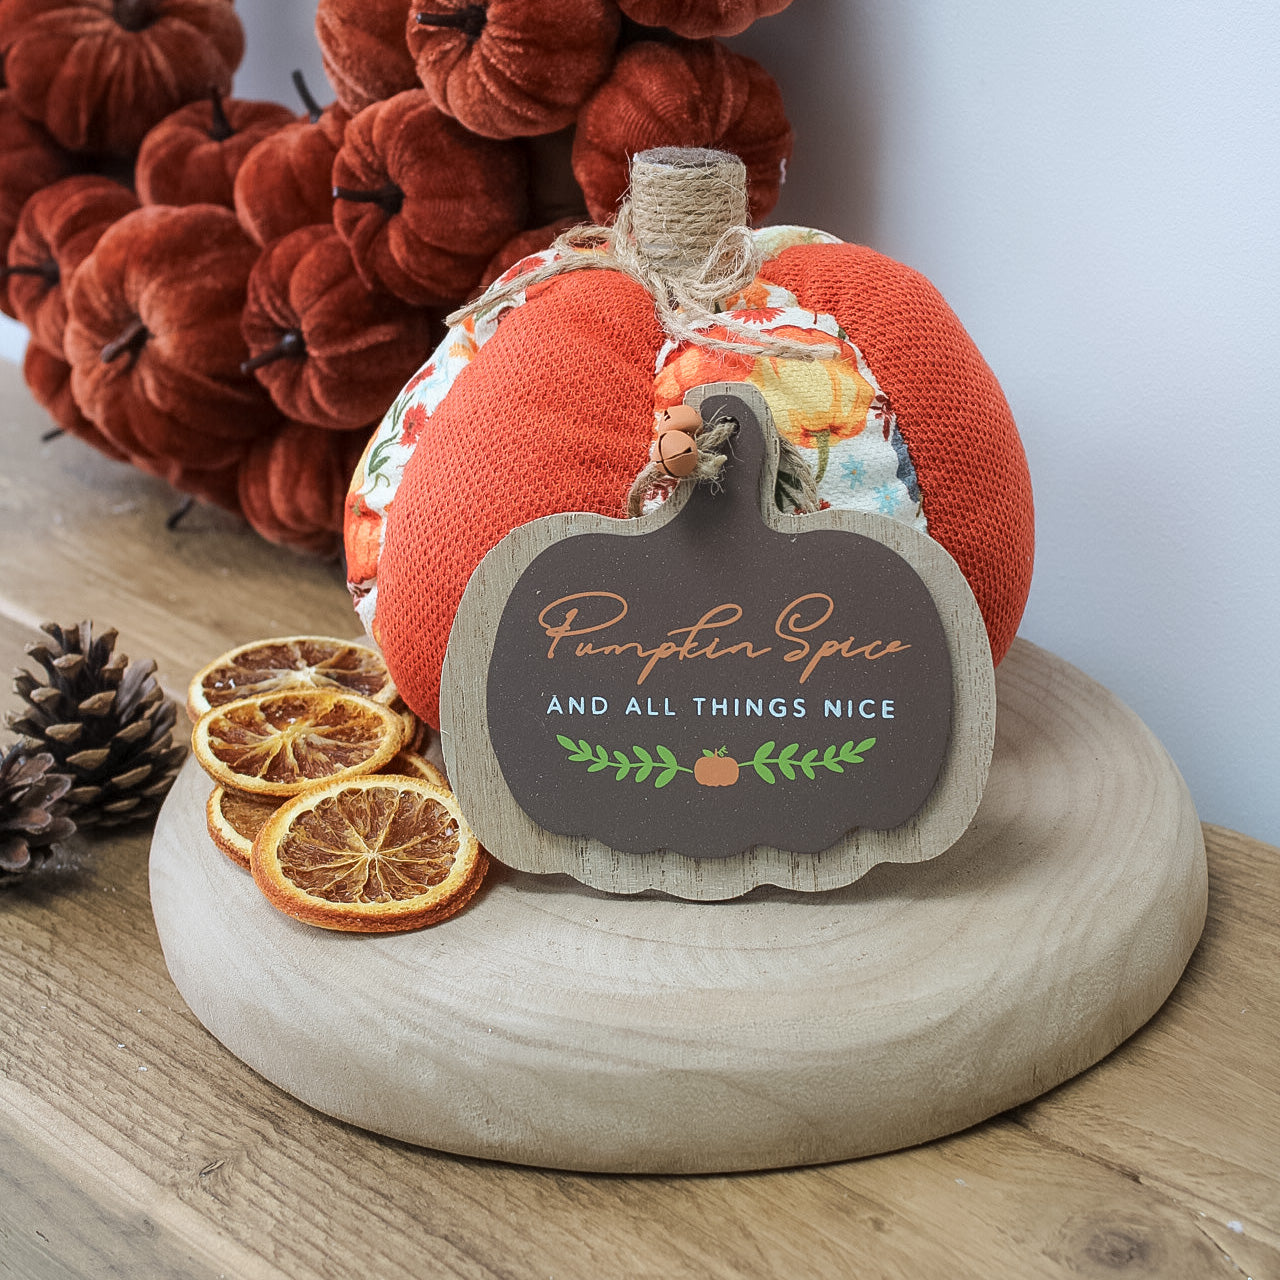 Pumpkin Spice and All Things Nice Wooden Pumpkin Shaped Hanger